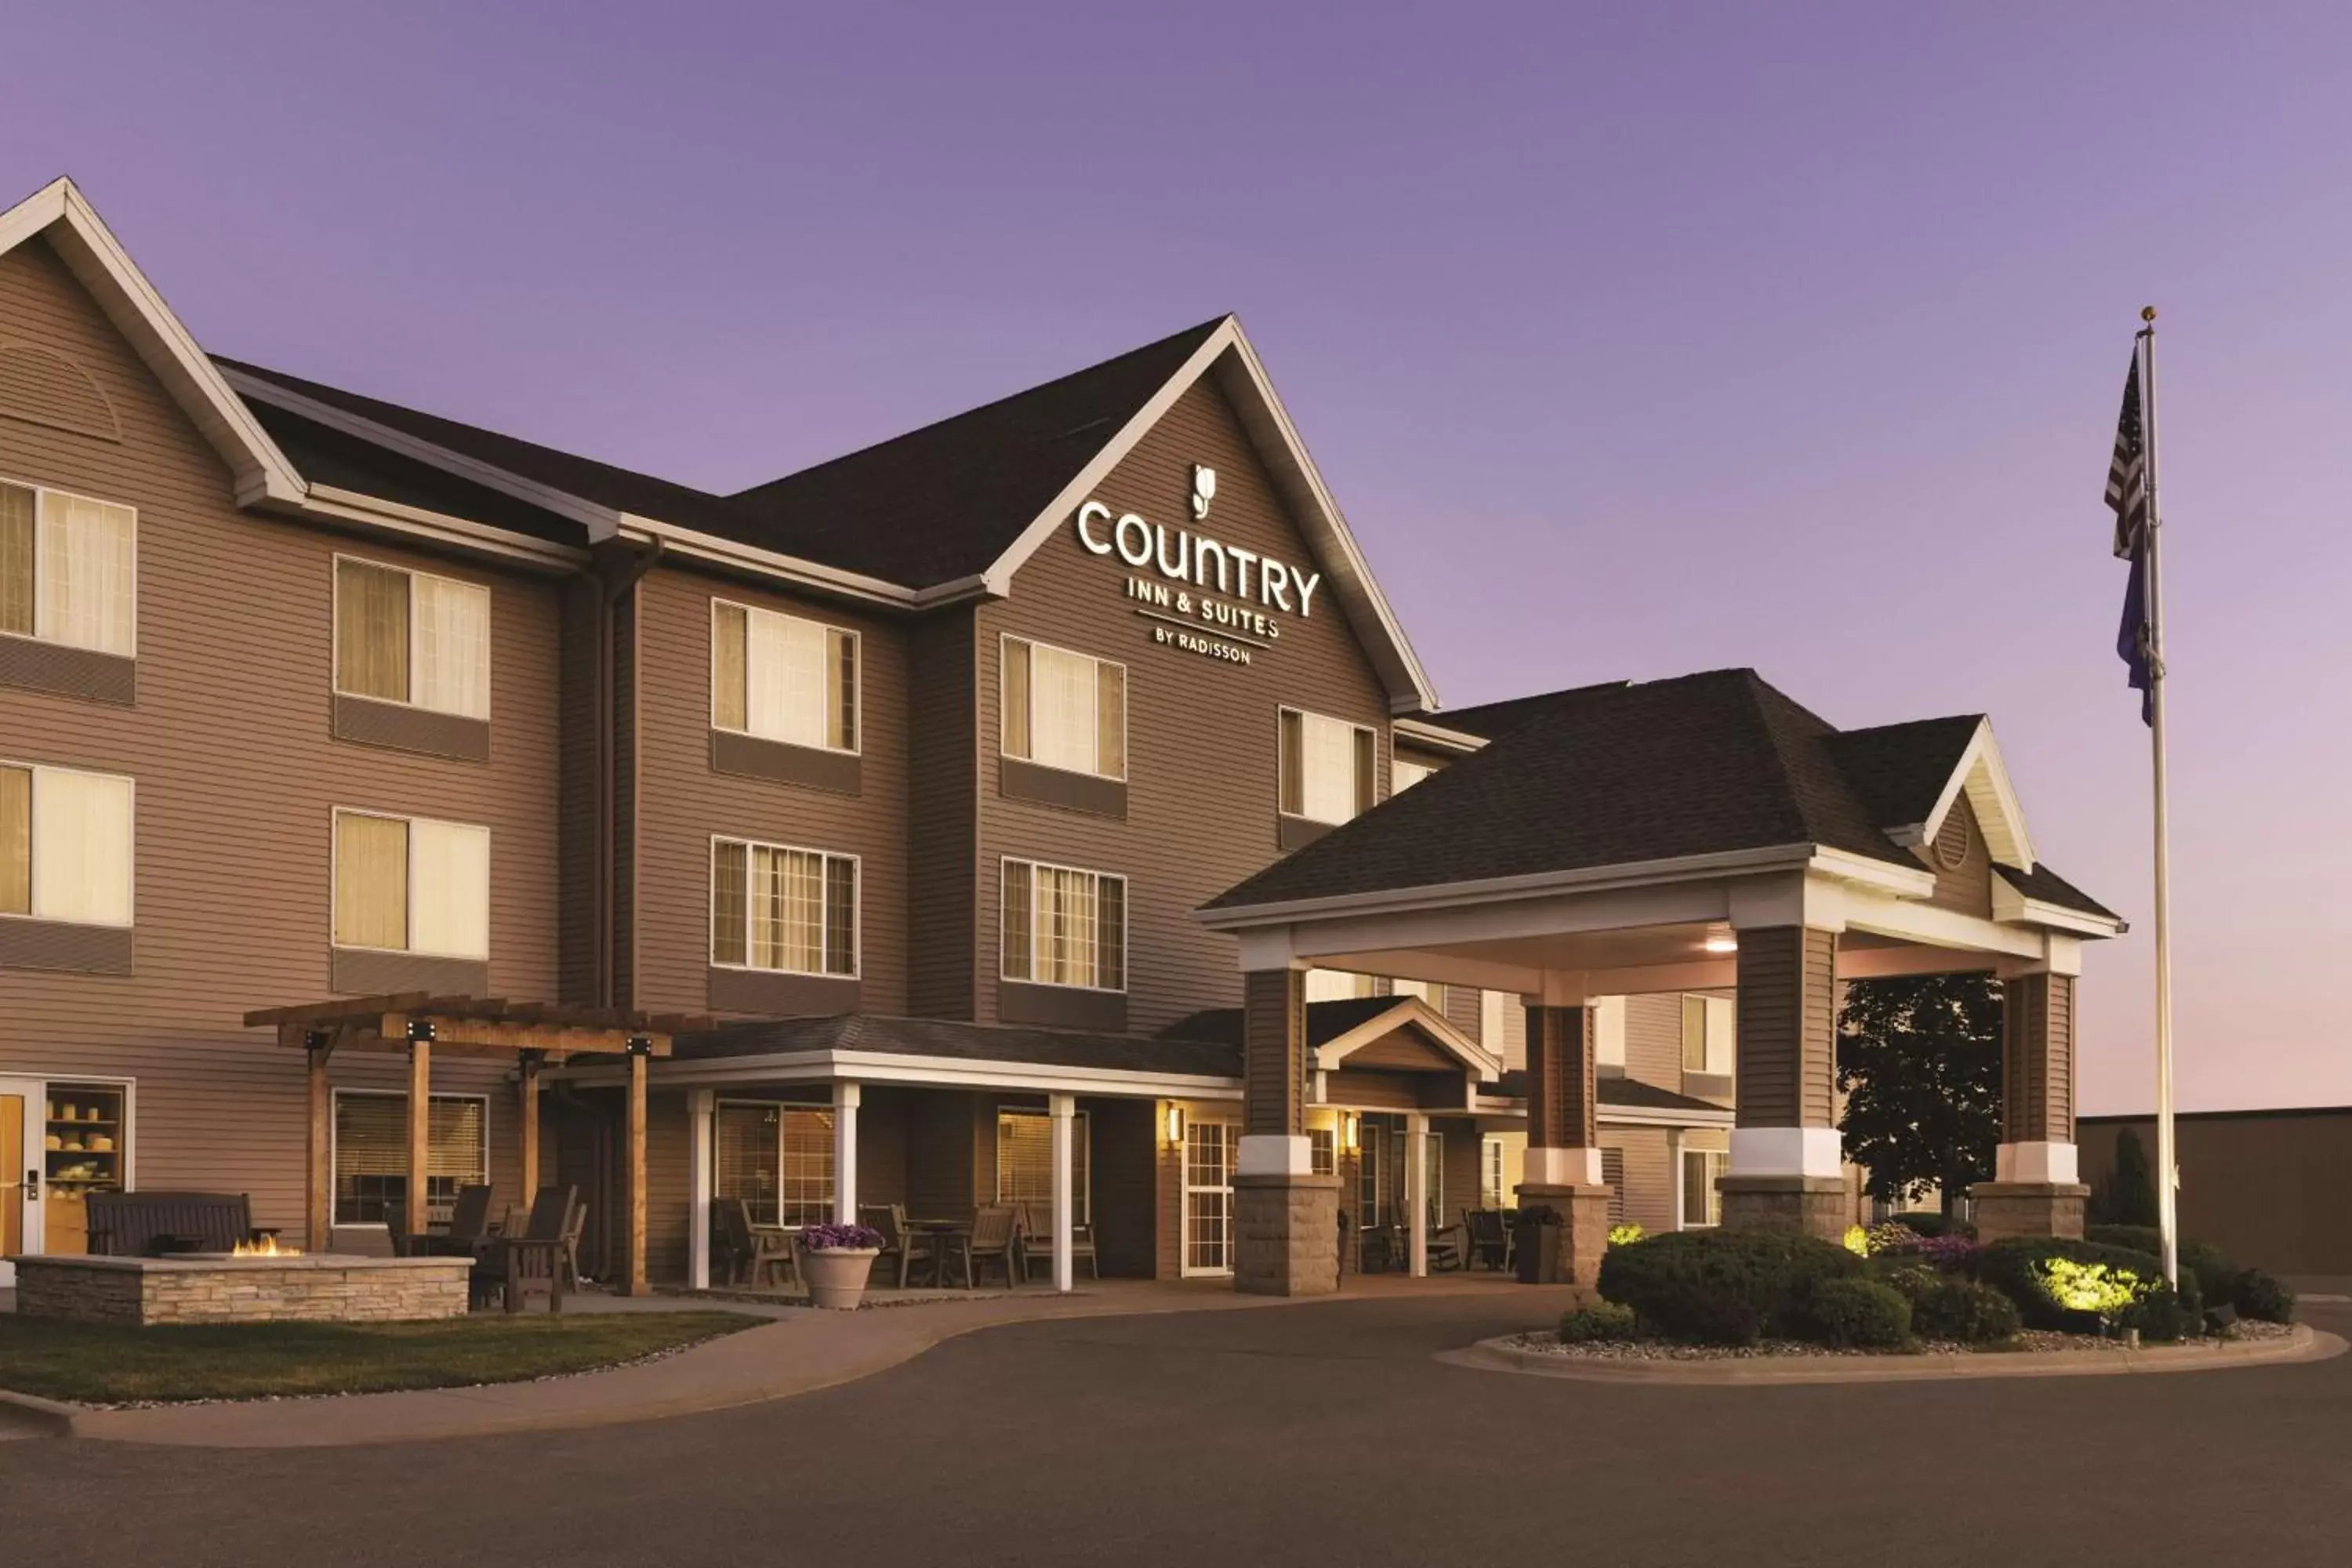 Property Building in Country Inn & Suites by Radisson, Albert Lea, MN